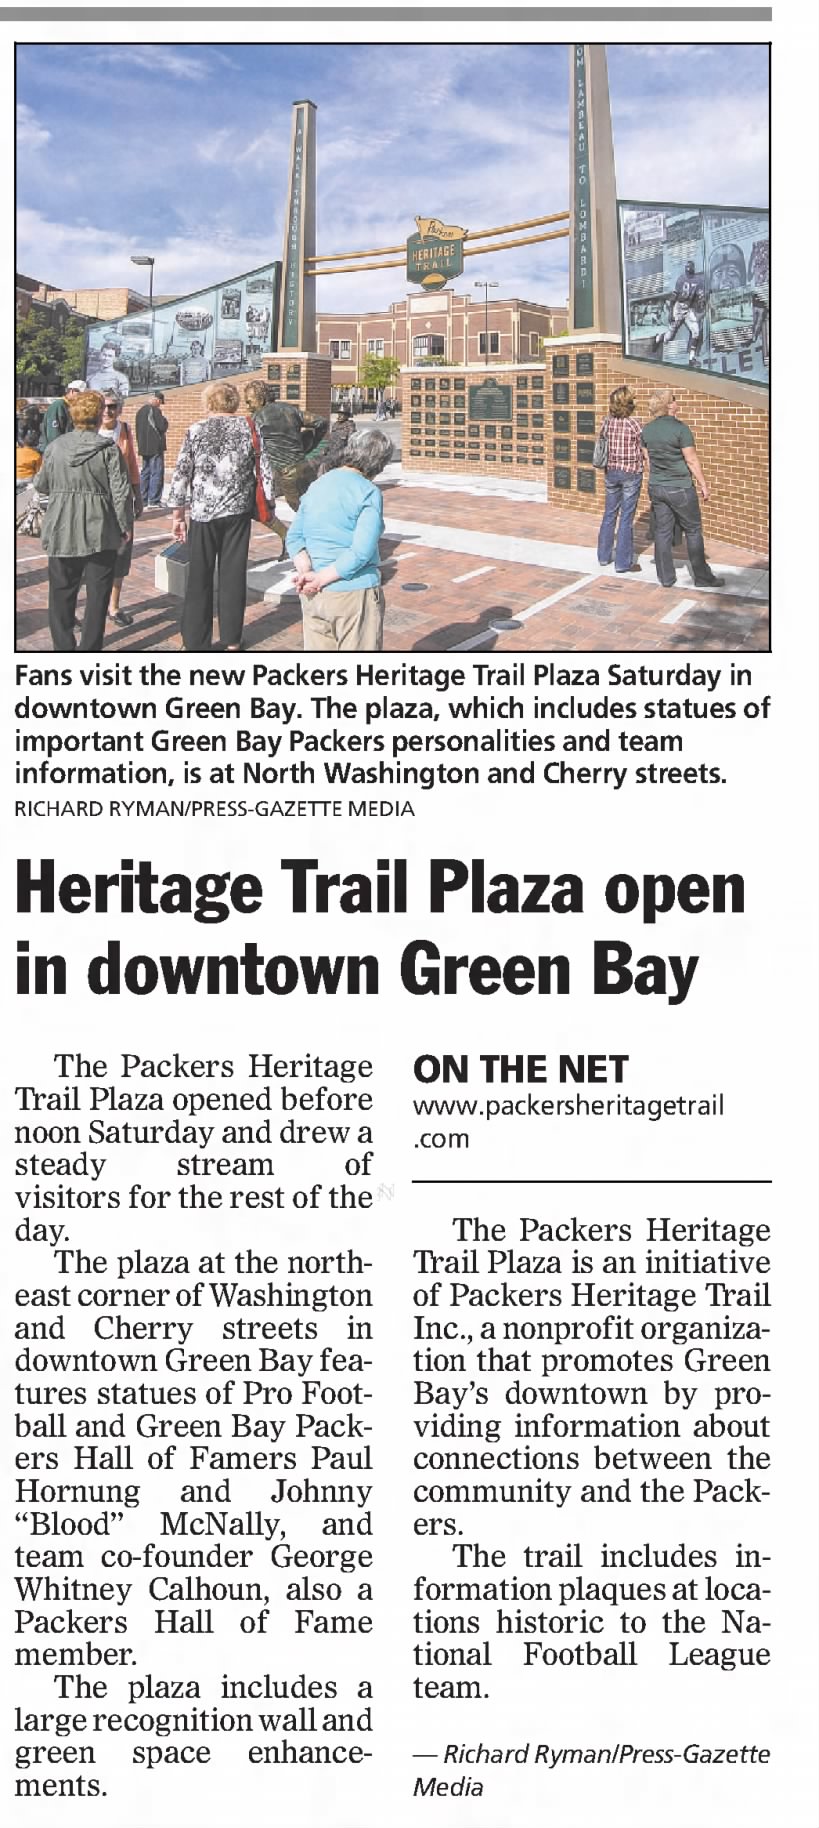 Heritage Trail Plaza open in downtown Green Bay